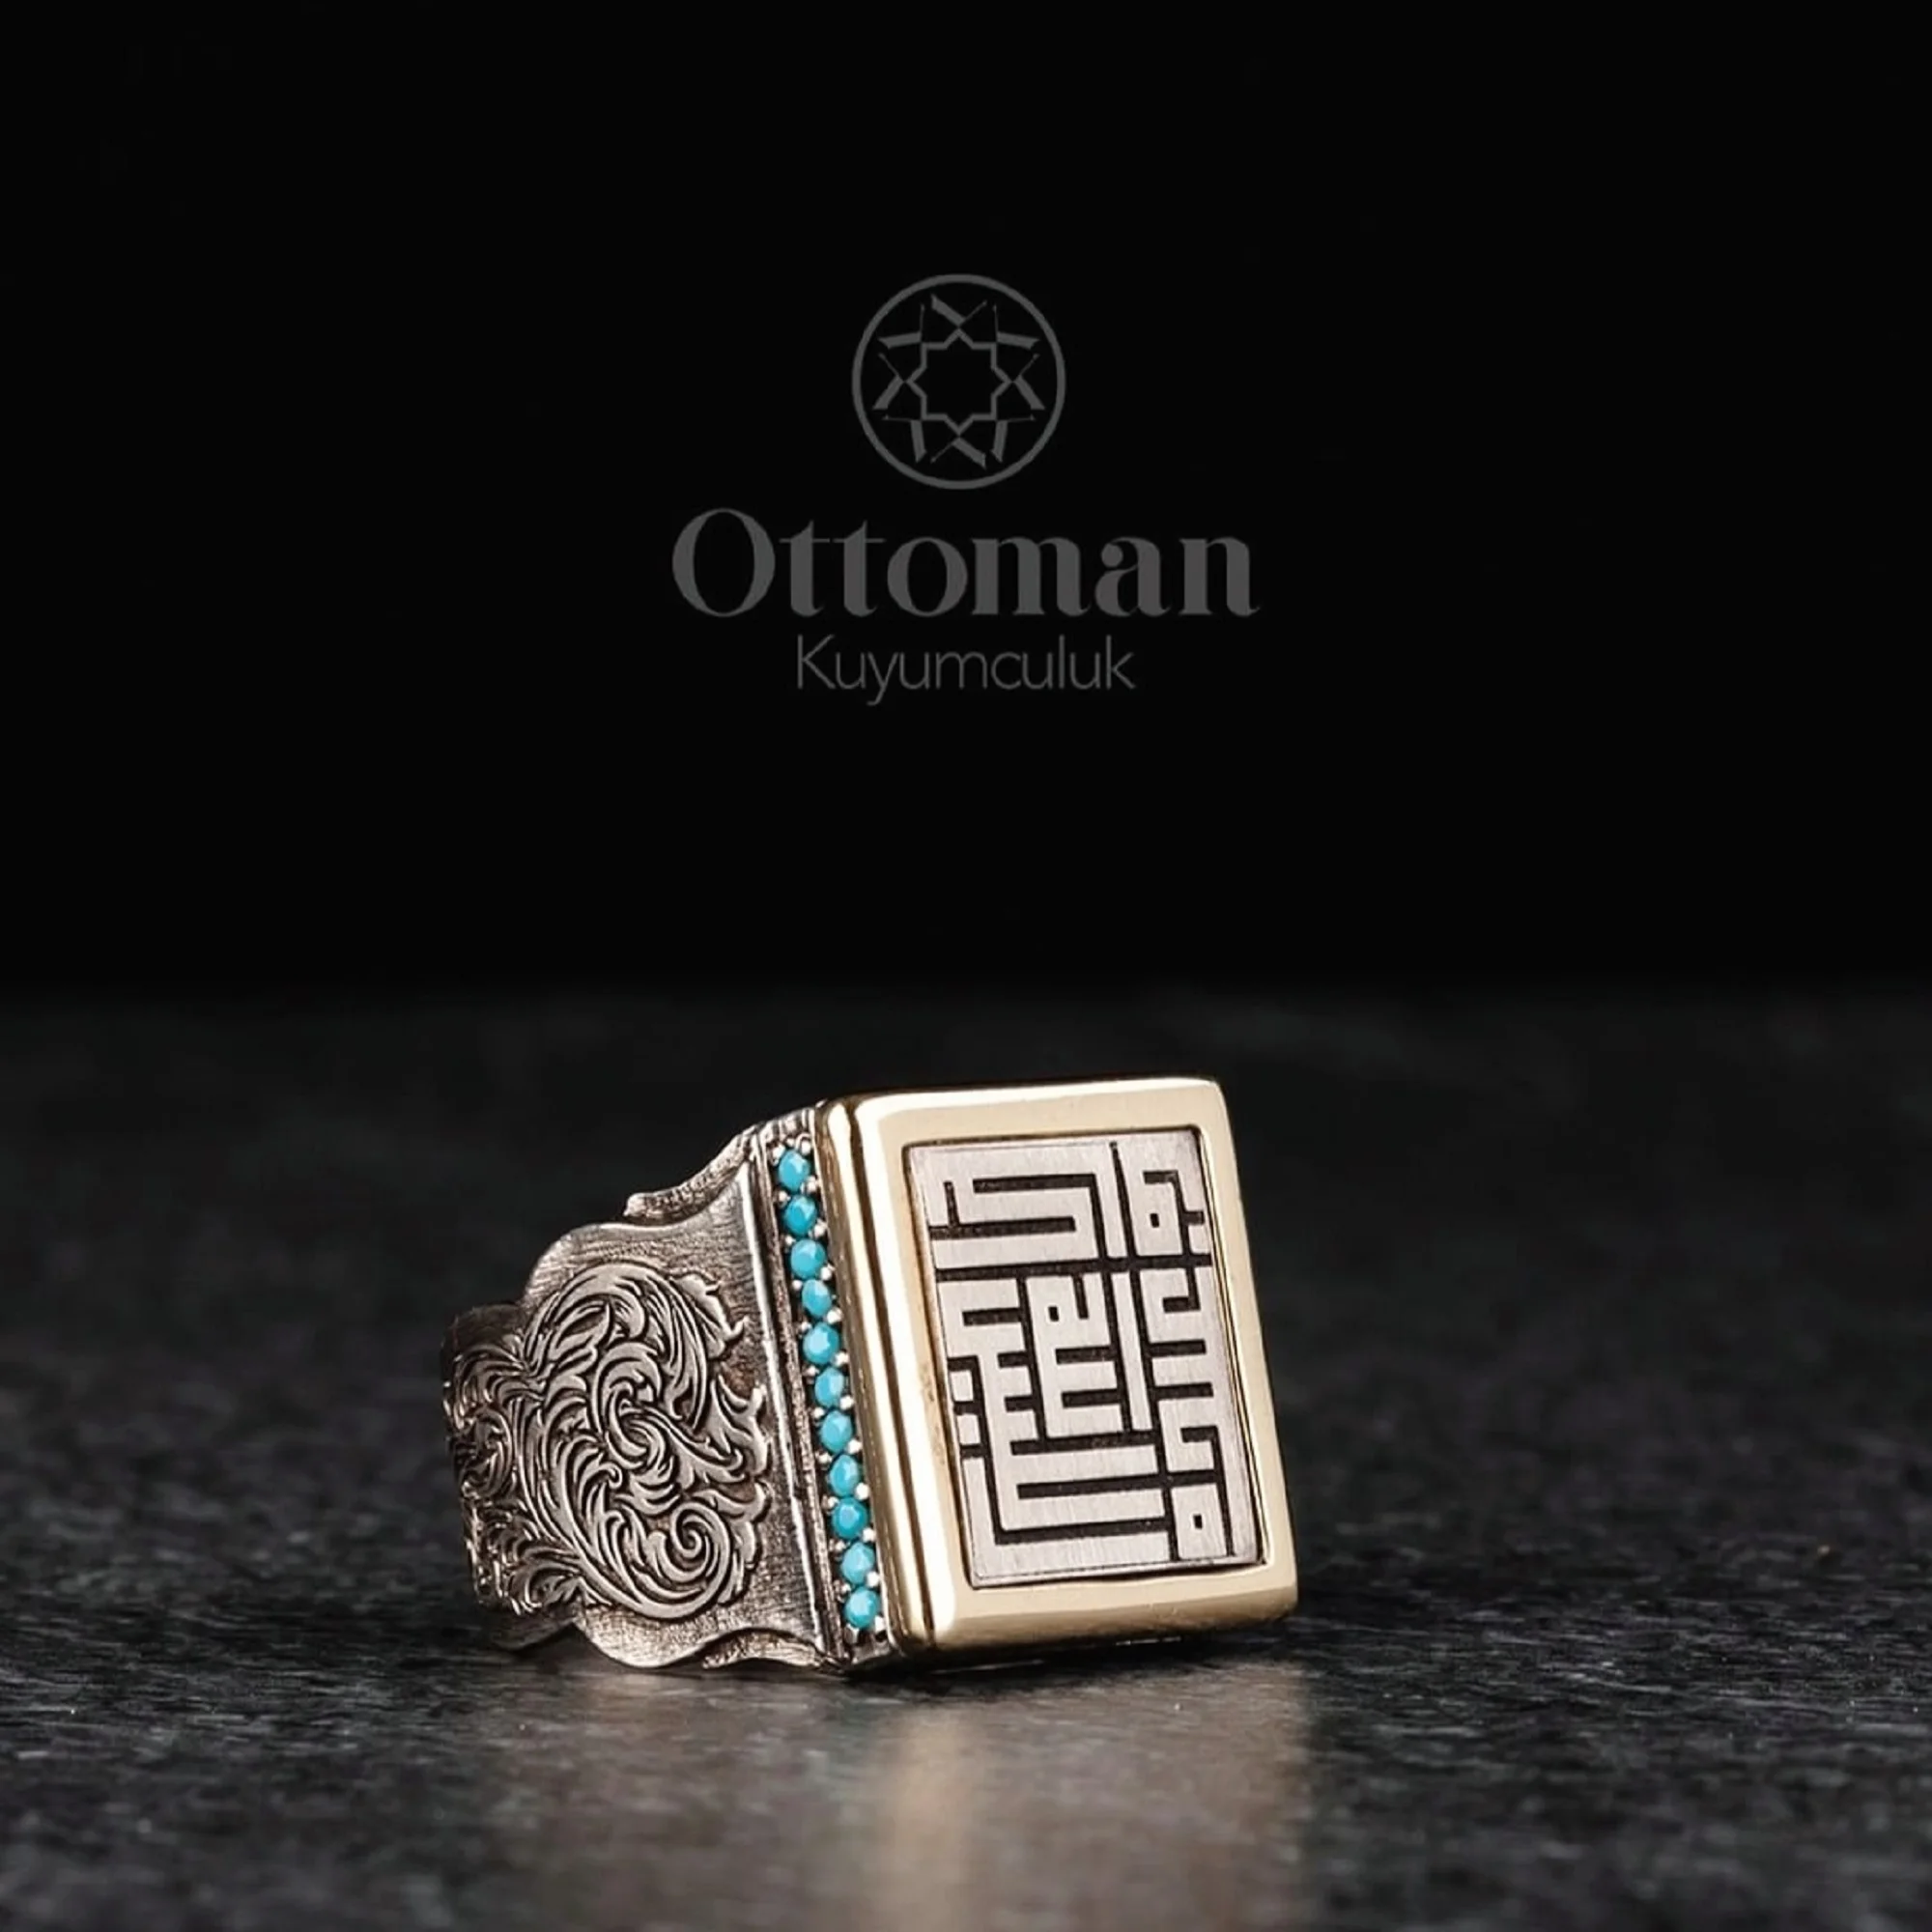 Delivery Square Kufi Calligraphy Silver Ring, Turquoise Micro Stones, Ottoman Jewelry and Rings, Turkish Handmade, Fraternity